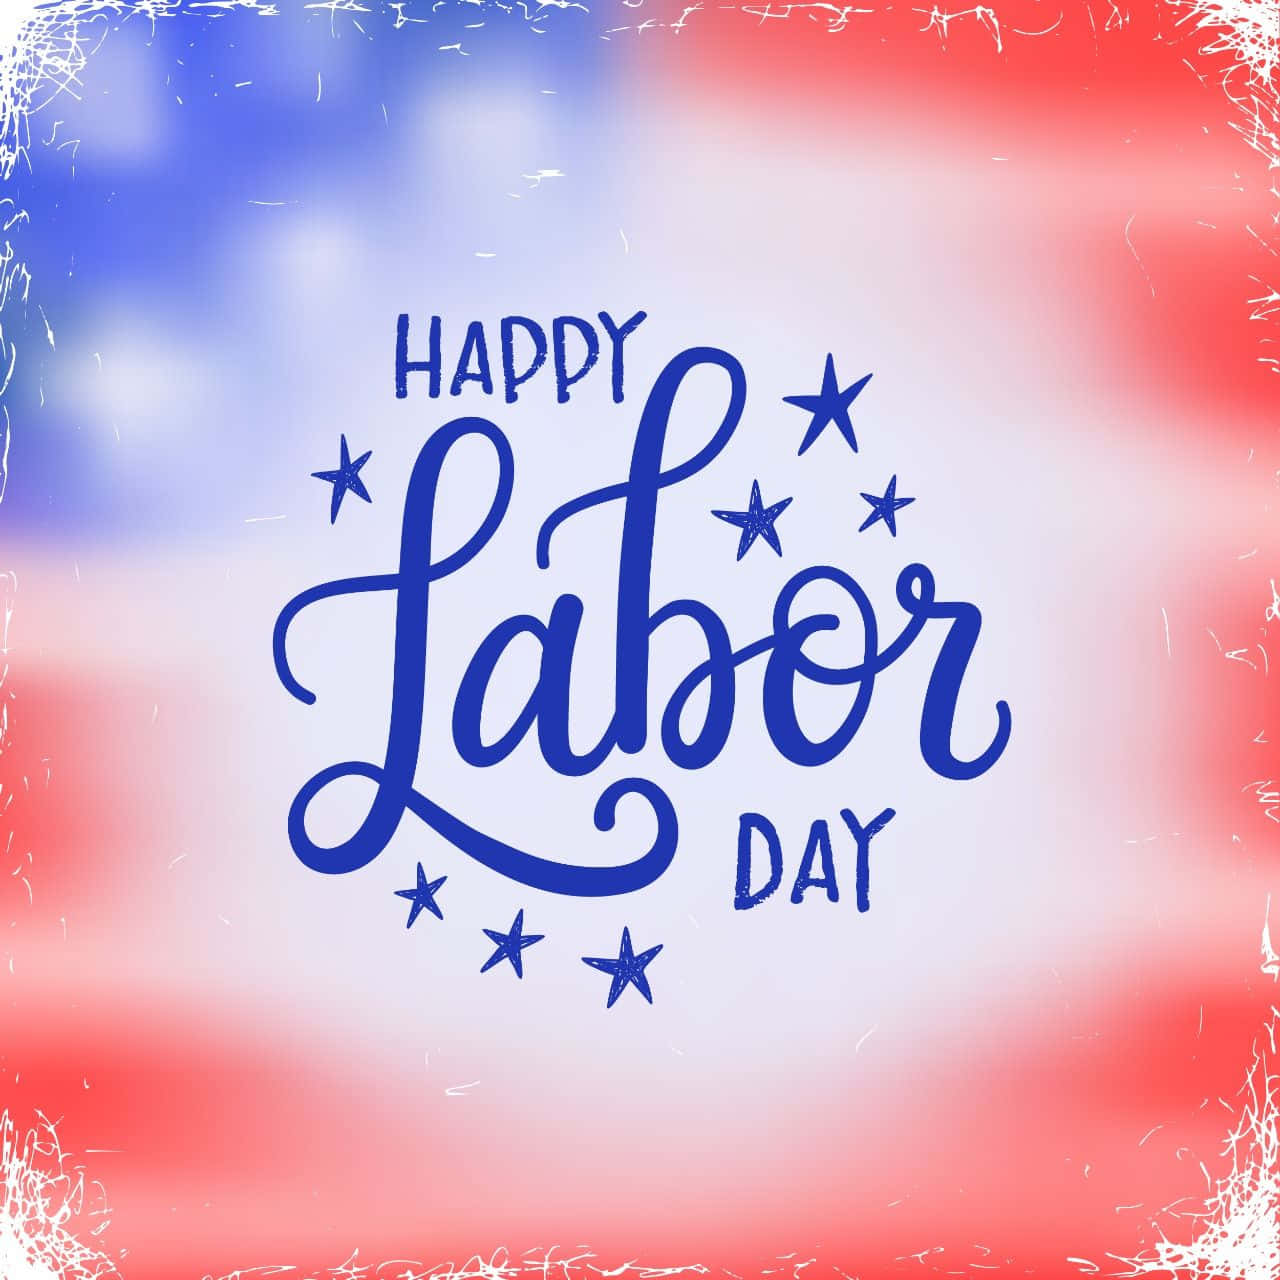 Celebrate Labor Day with a labor of love